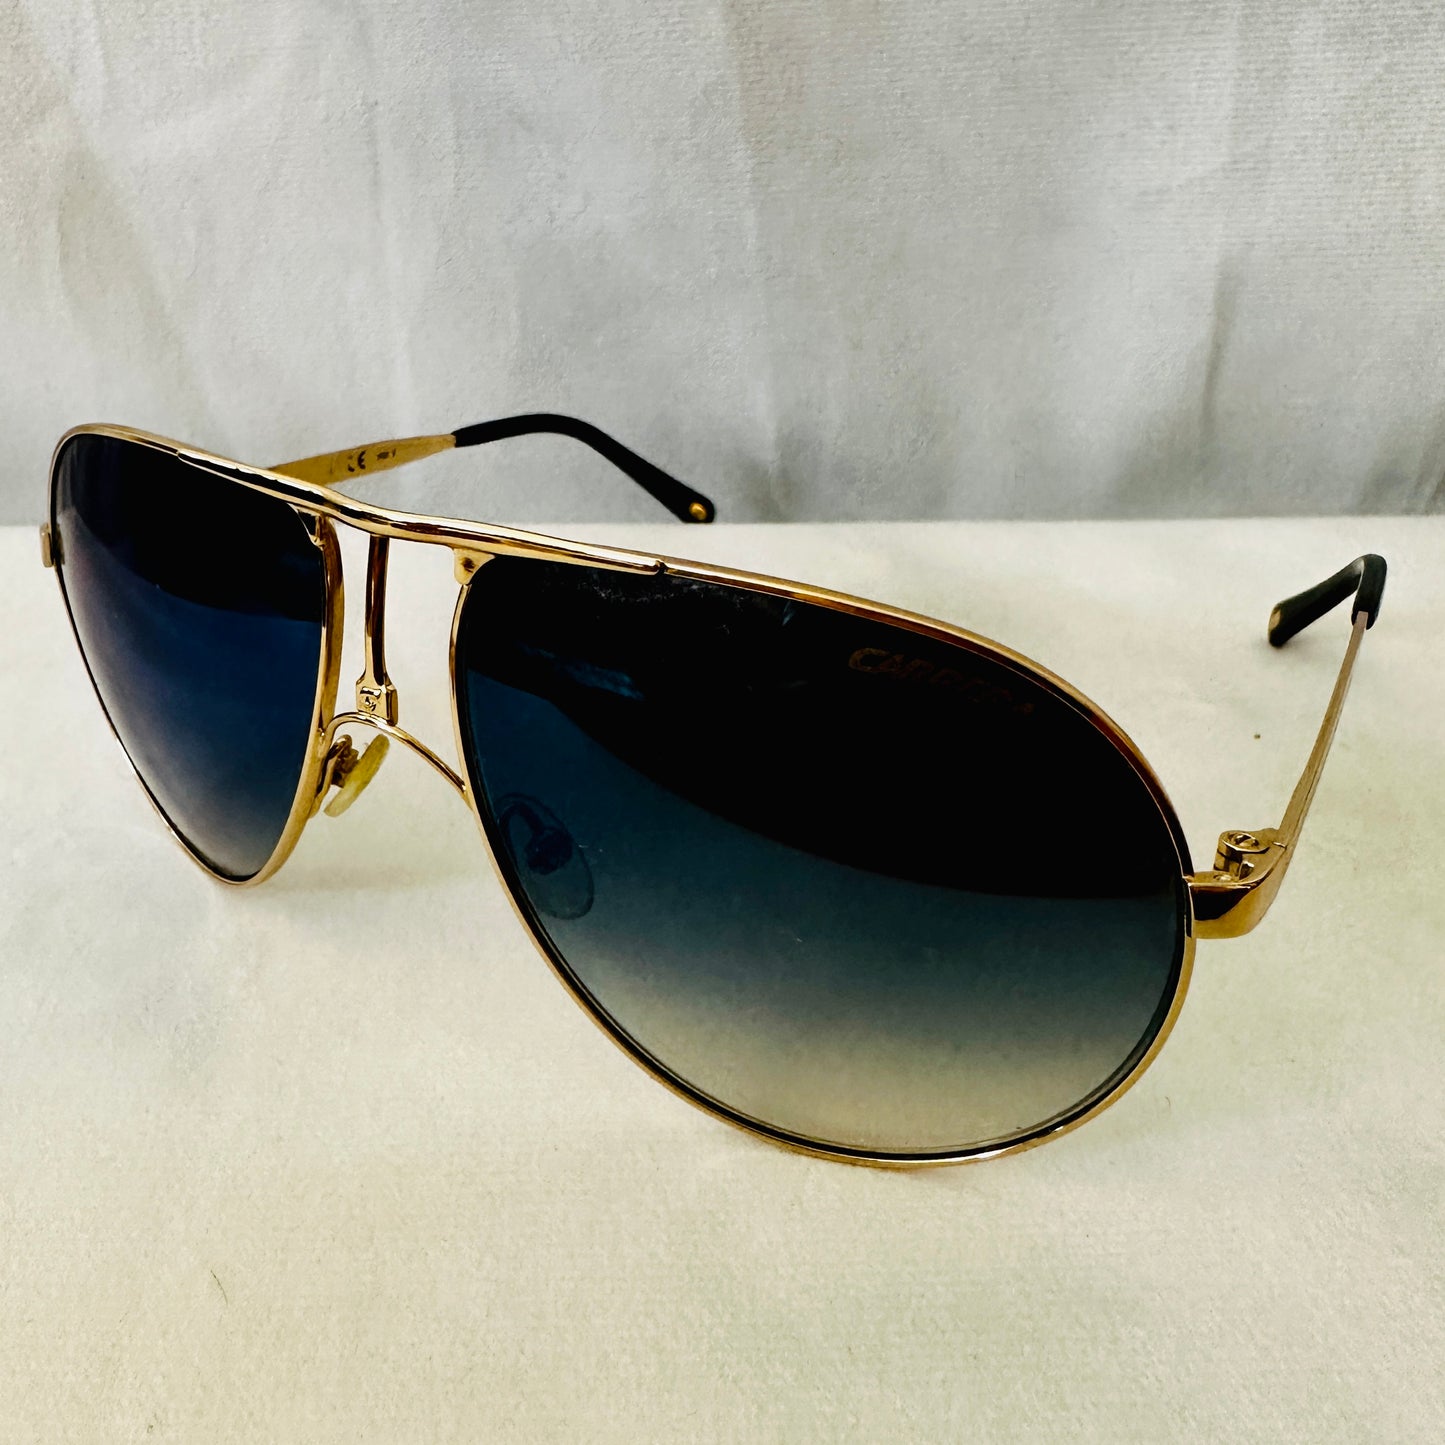 Carrera 5914 Vintage Sunglasses - Made in Italy